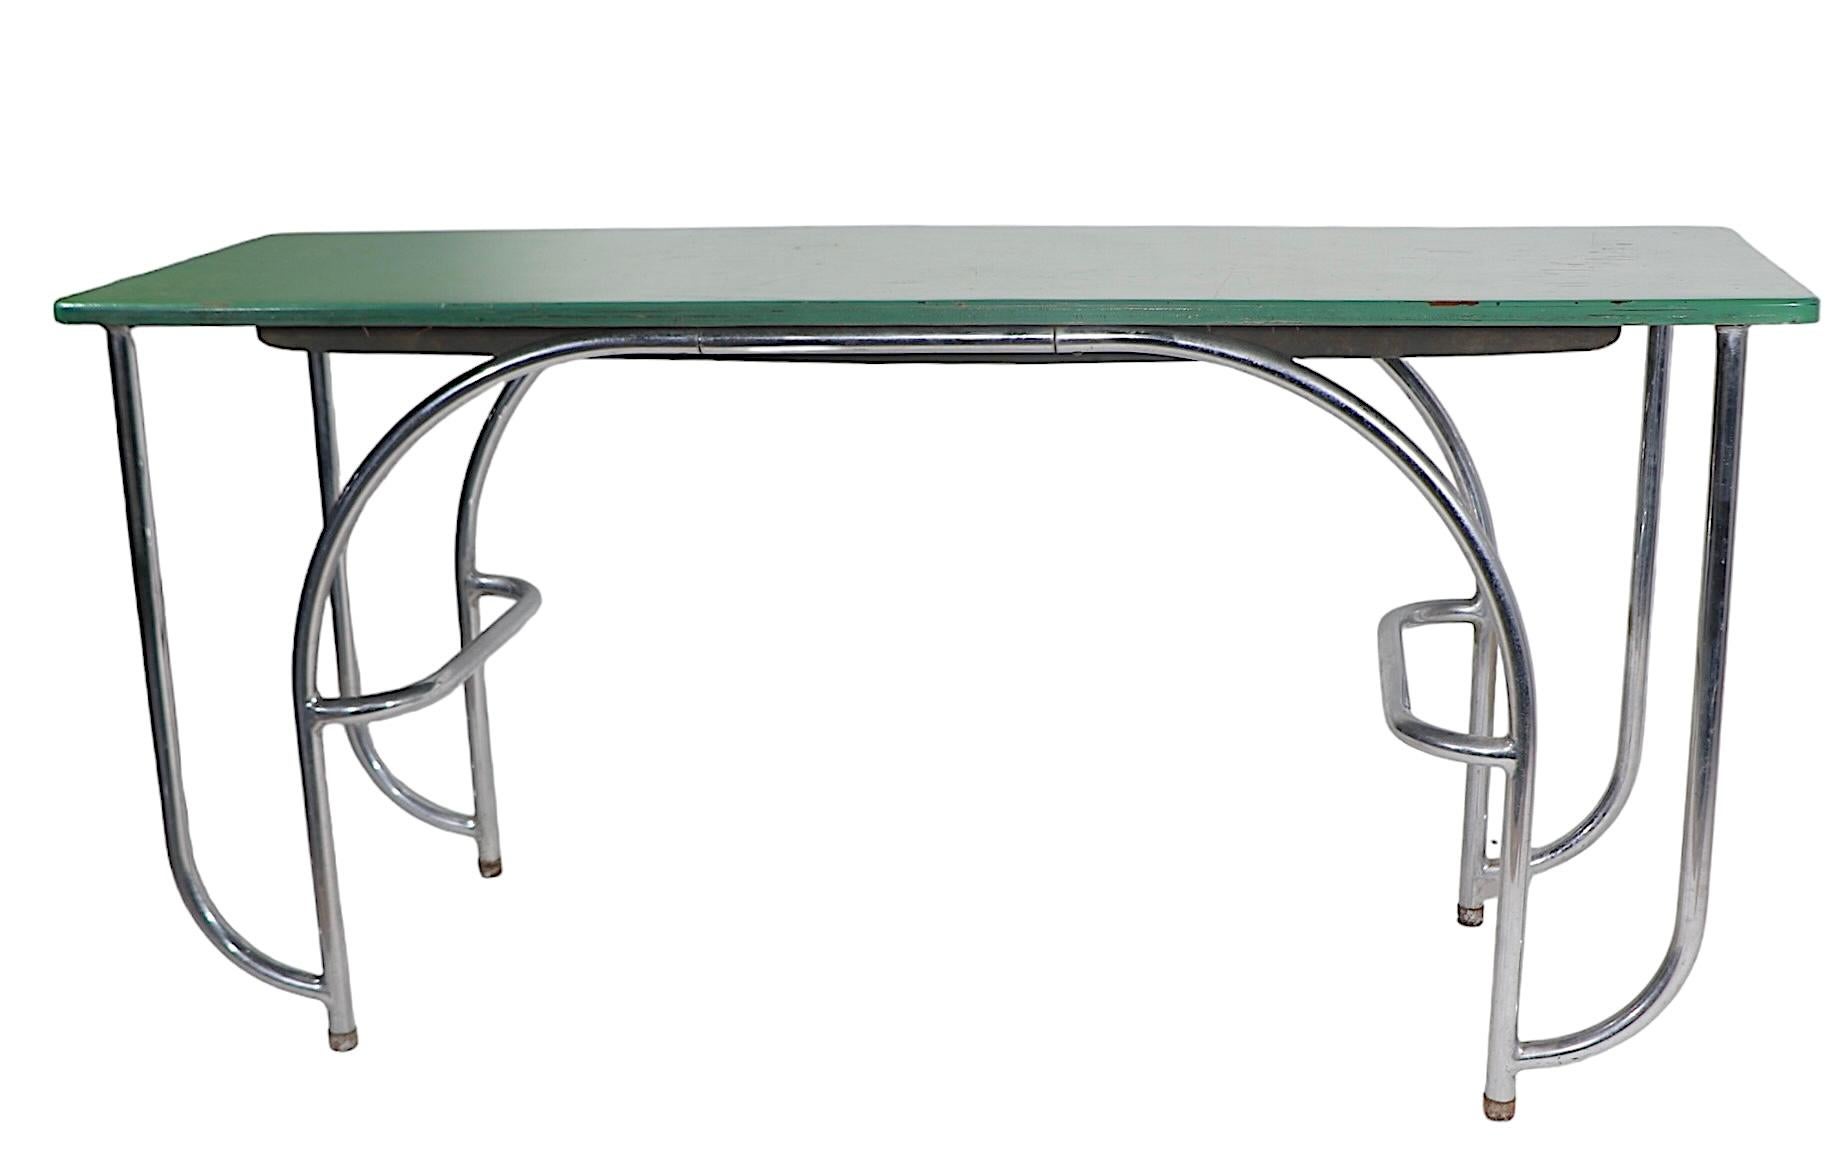 Exceptional Art Deco, Machine Age  console table designed by KEM Weber for Lloyd Furniture Company circa 1930's. The table features a stylized tubular chrome base, which supports the painted  wood top.  Originally designed as a console table, this